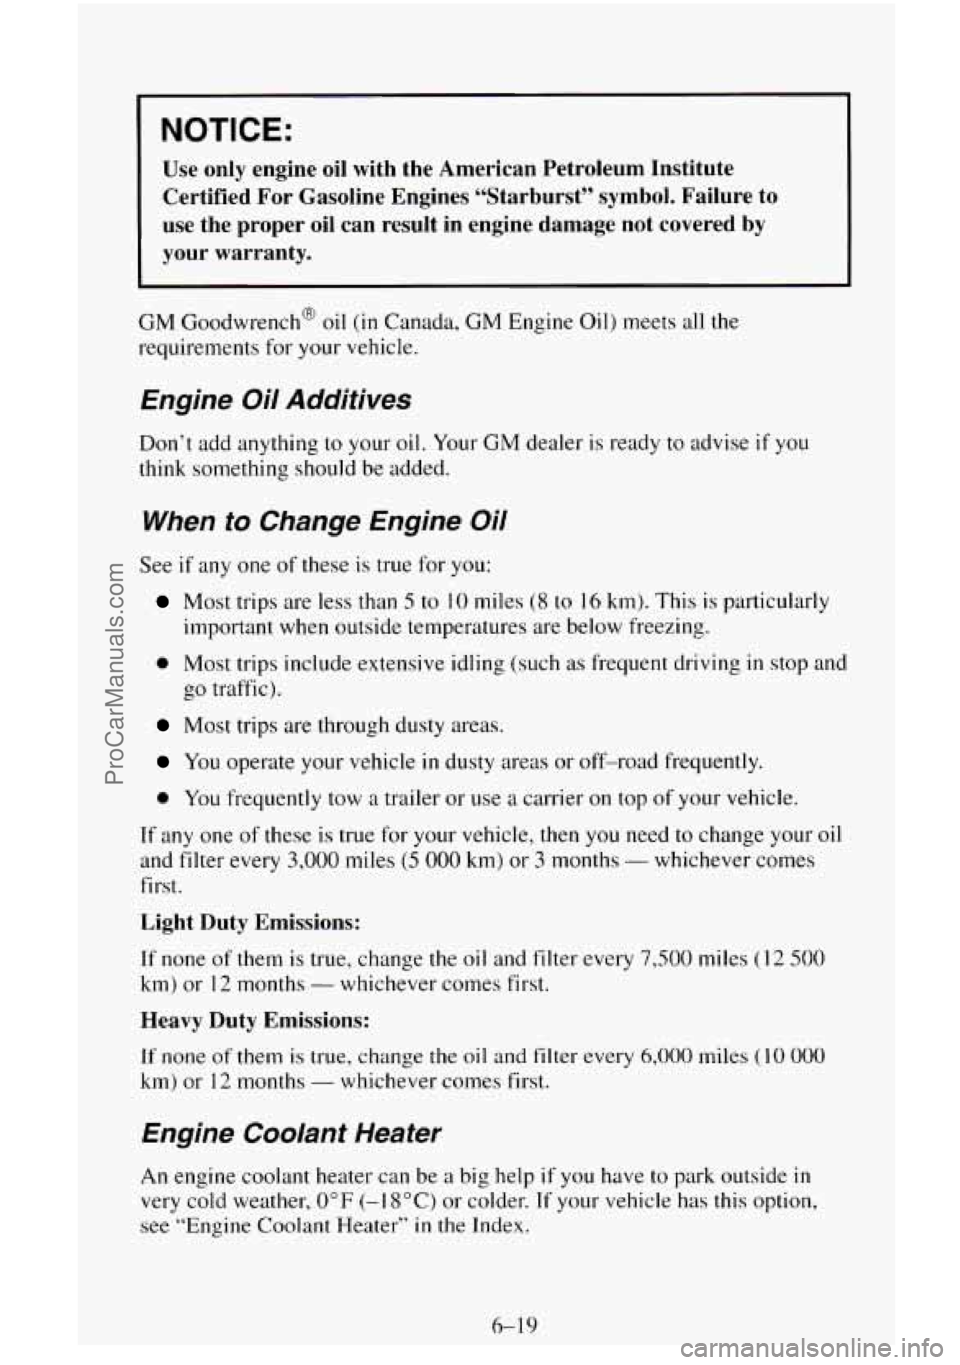 CHEVROLET SUBURBAN 1995  Owners Manual NOTICE: 
Use  only  engine oil with  the  American  Petroleum  Institute 
Certified  For  Gasoline  Engines  “Starburst”  symbol.  Failure  \
to 
use  the  proper  oil  can  result  in  engine  da